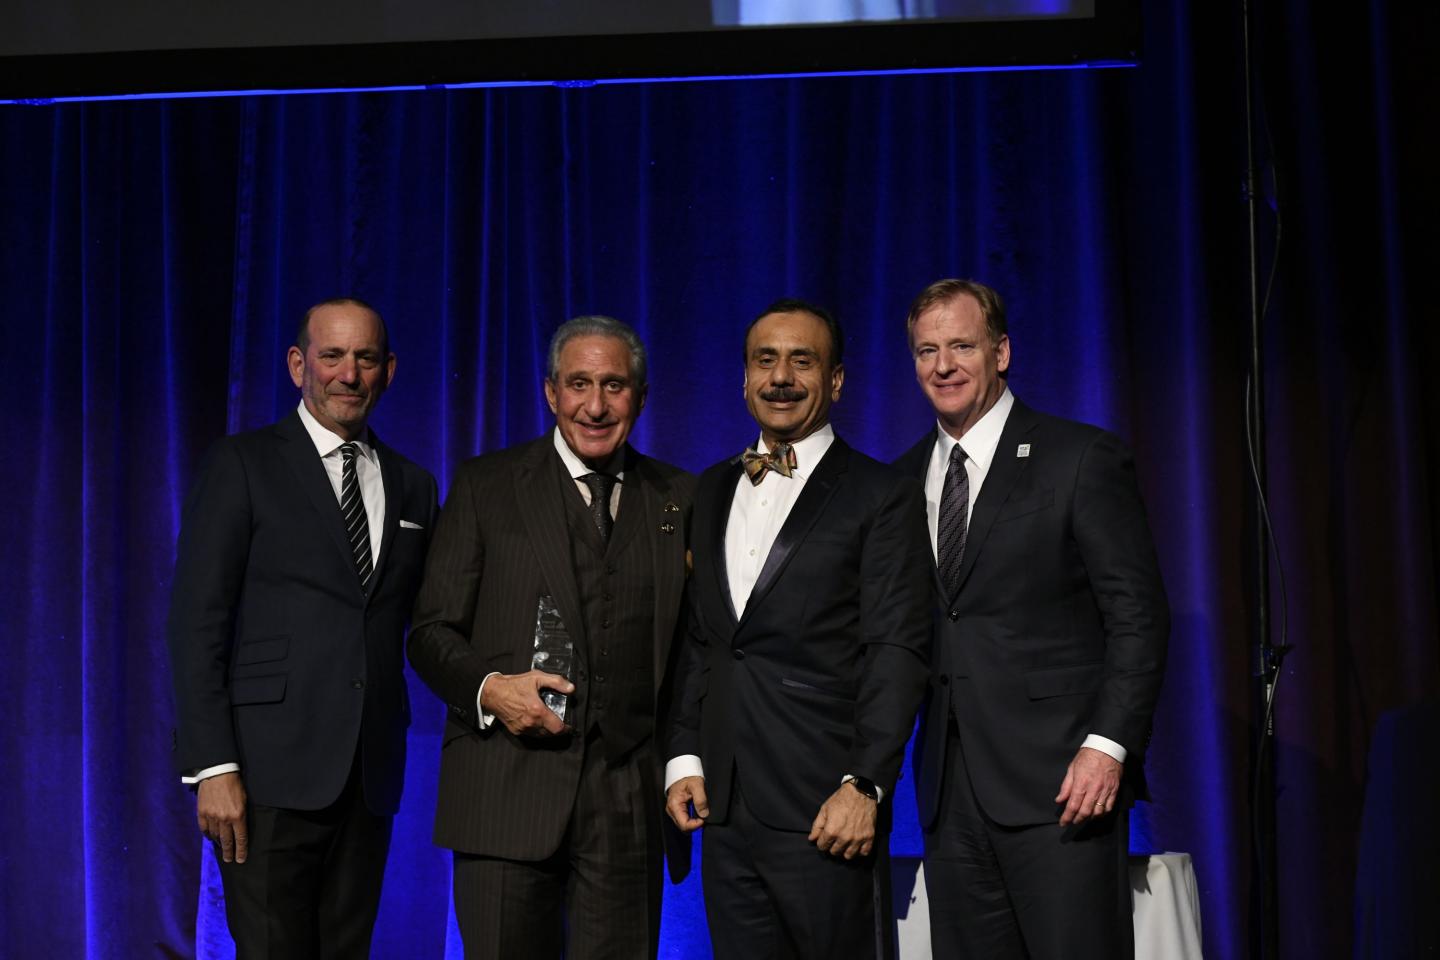 Arthur Blank Honored at Prostate Cancer Research Gala